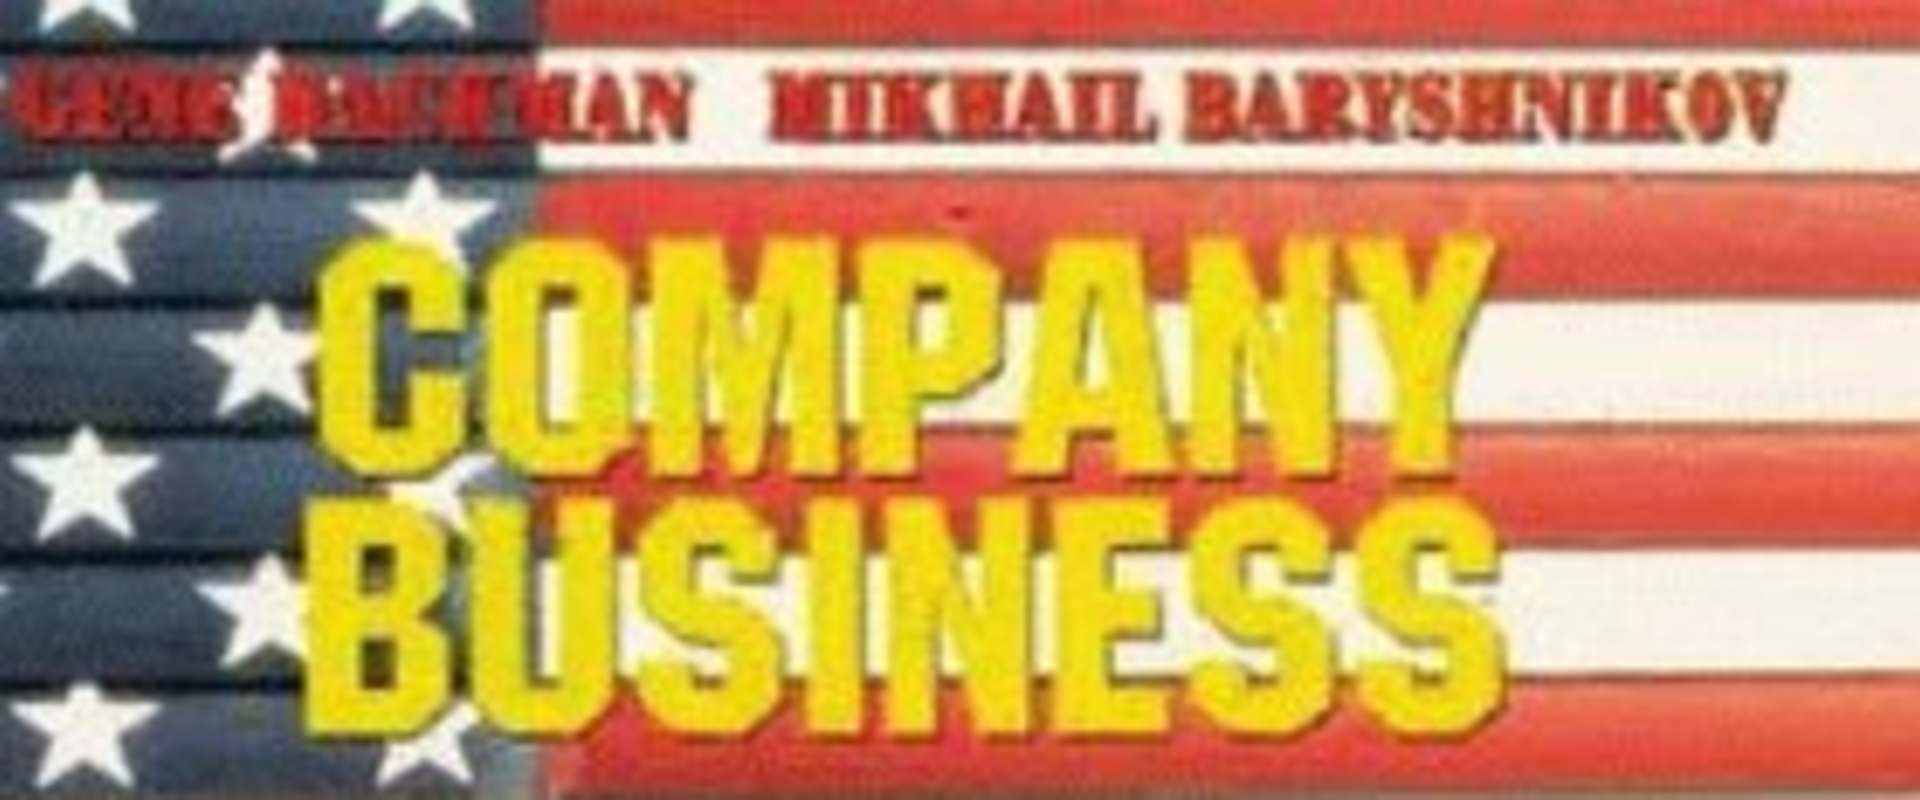 Company Business background 2